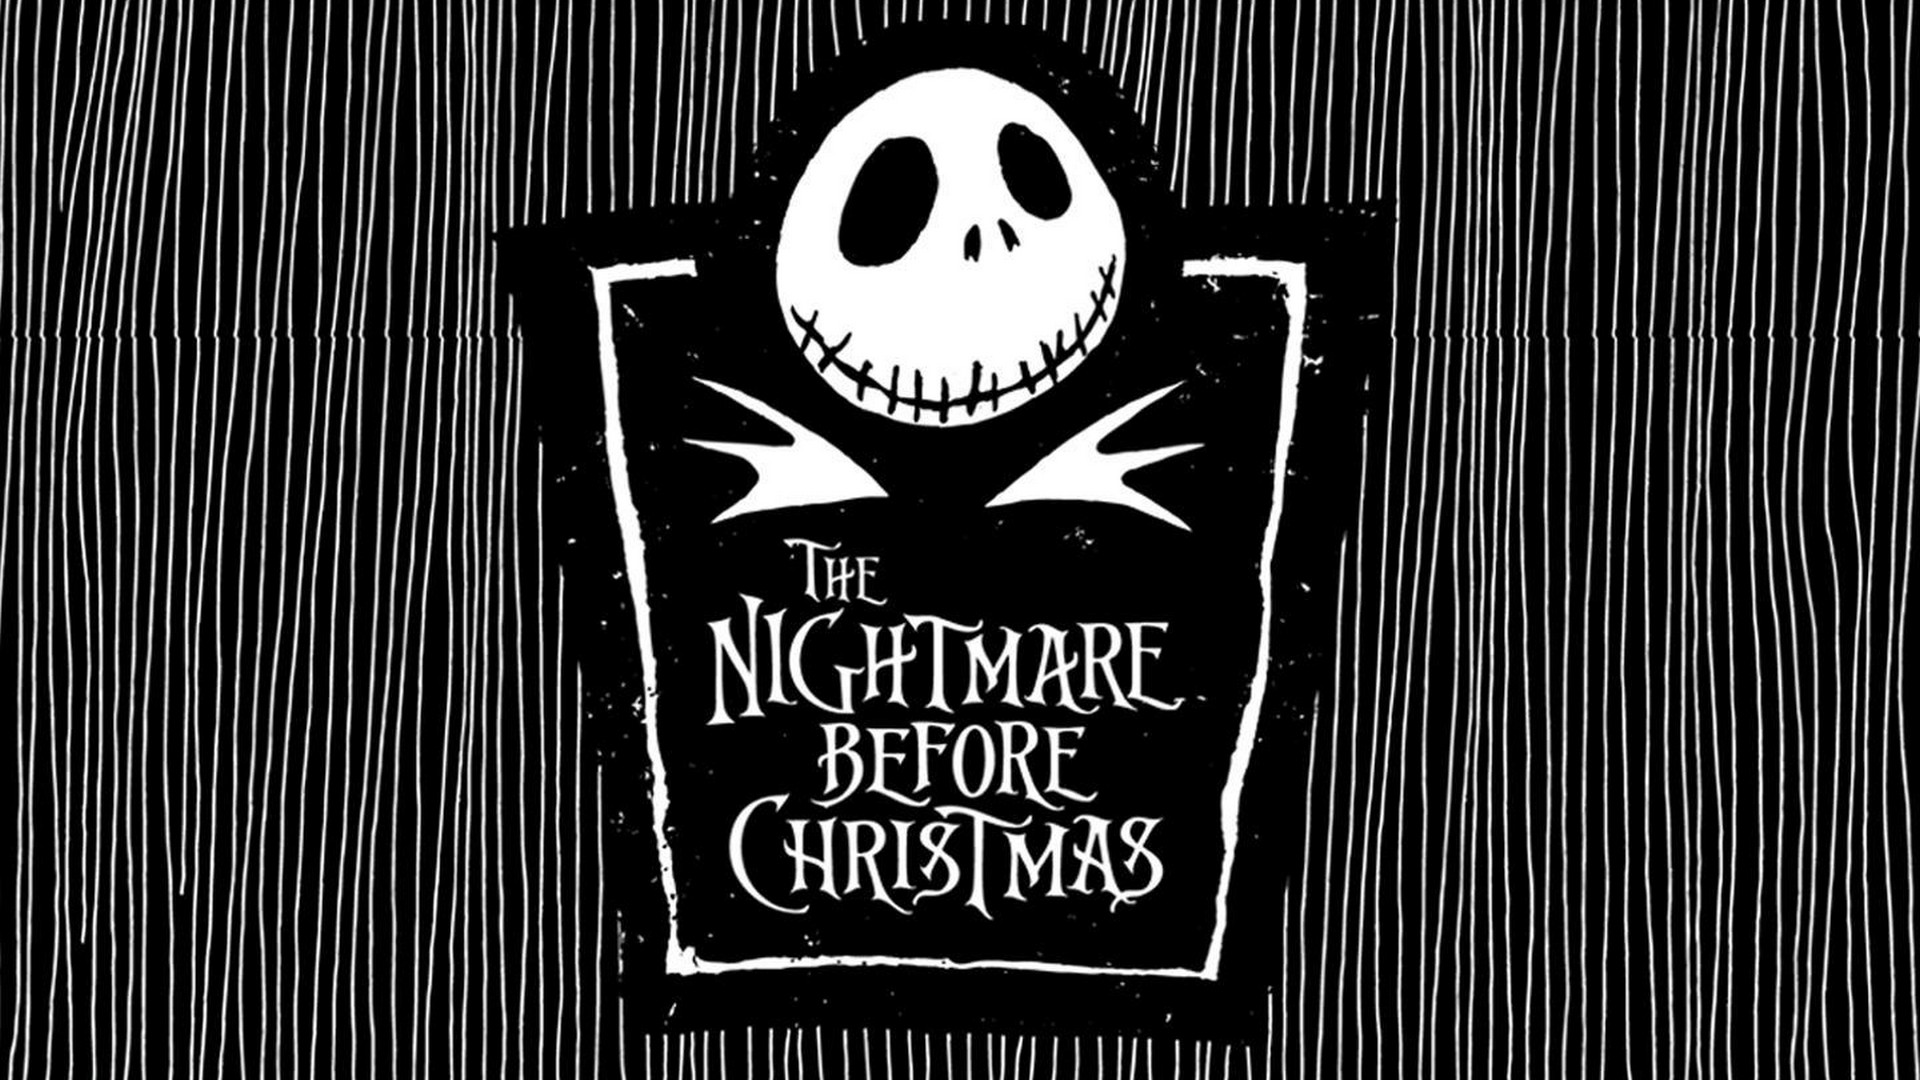 Nightmare Before Christmas Wallpaper For Desktop with high-resolution 1920x1080 pixel. You can use this poster wallpaper for your Desktop Computers, Mac Screensavers, Windows Backgrounds, iPhone Wallpapers, Tablet or Android Lock screen and another Mobile device